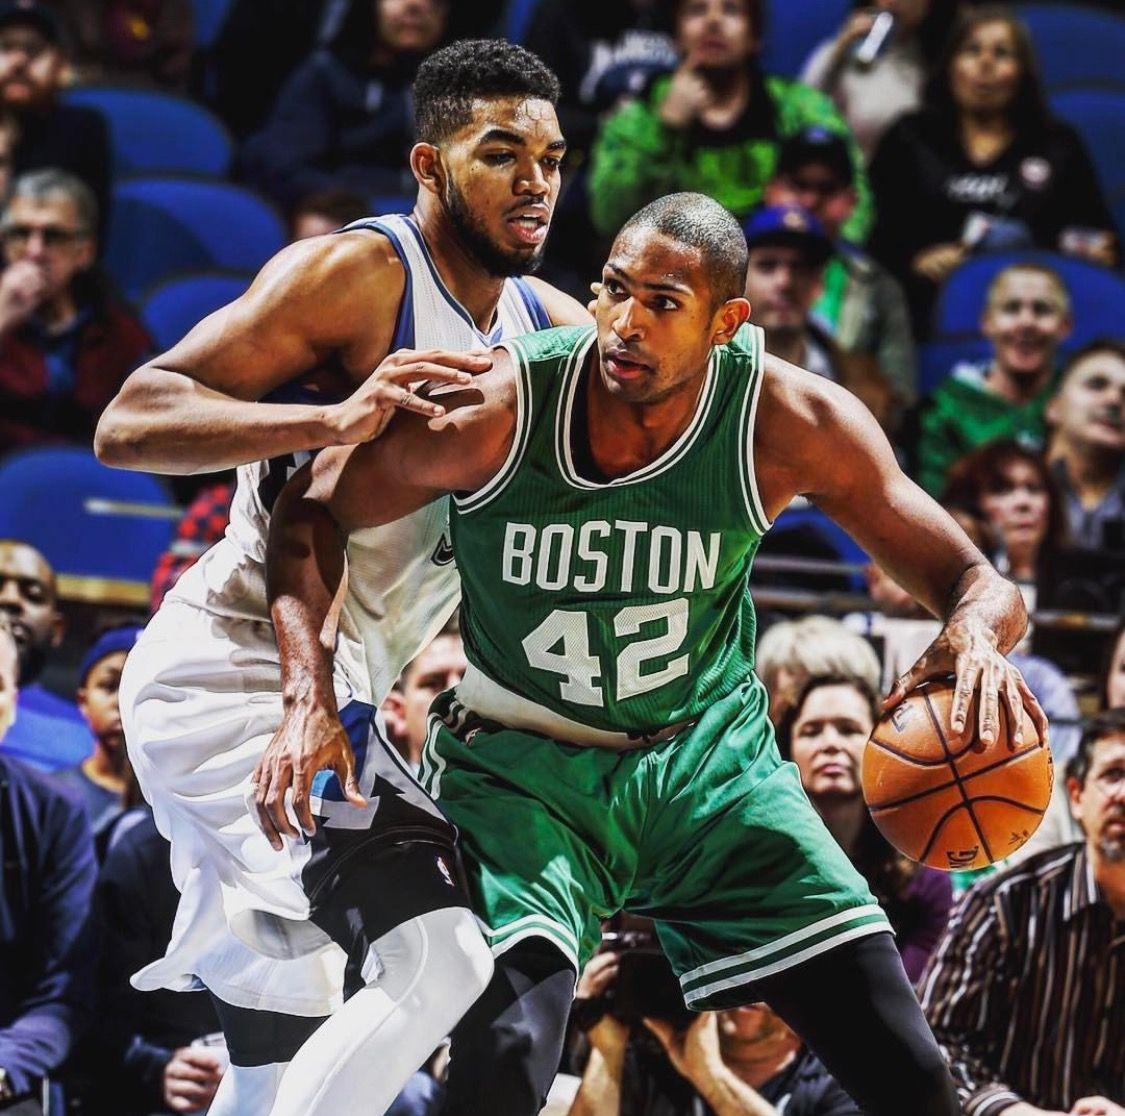 Al Horford and Karl Anthony Towns. Both proud Dominicans. Hoopers